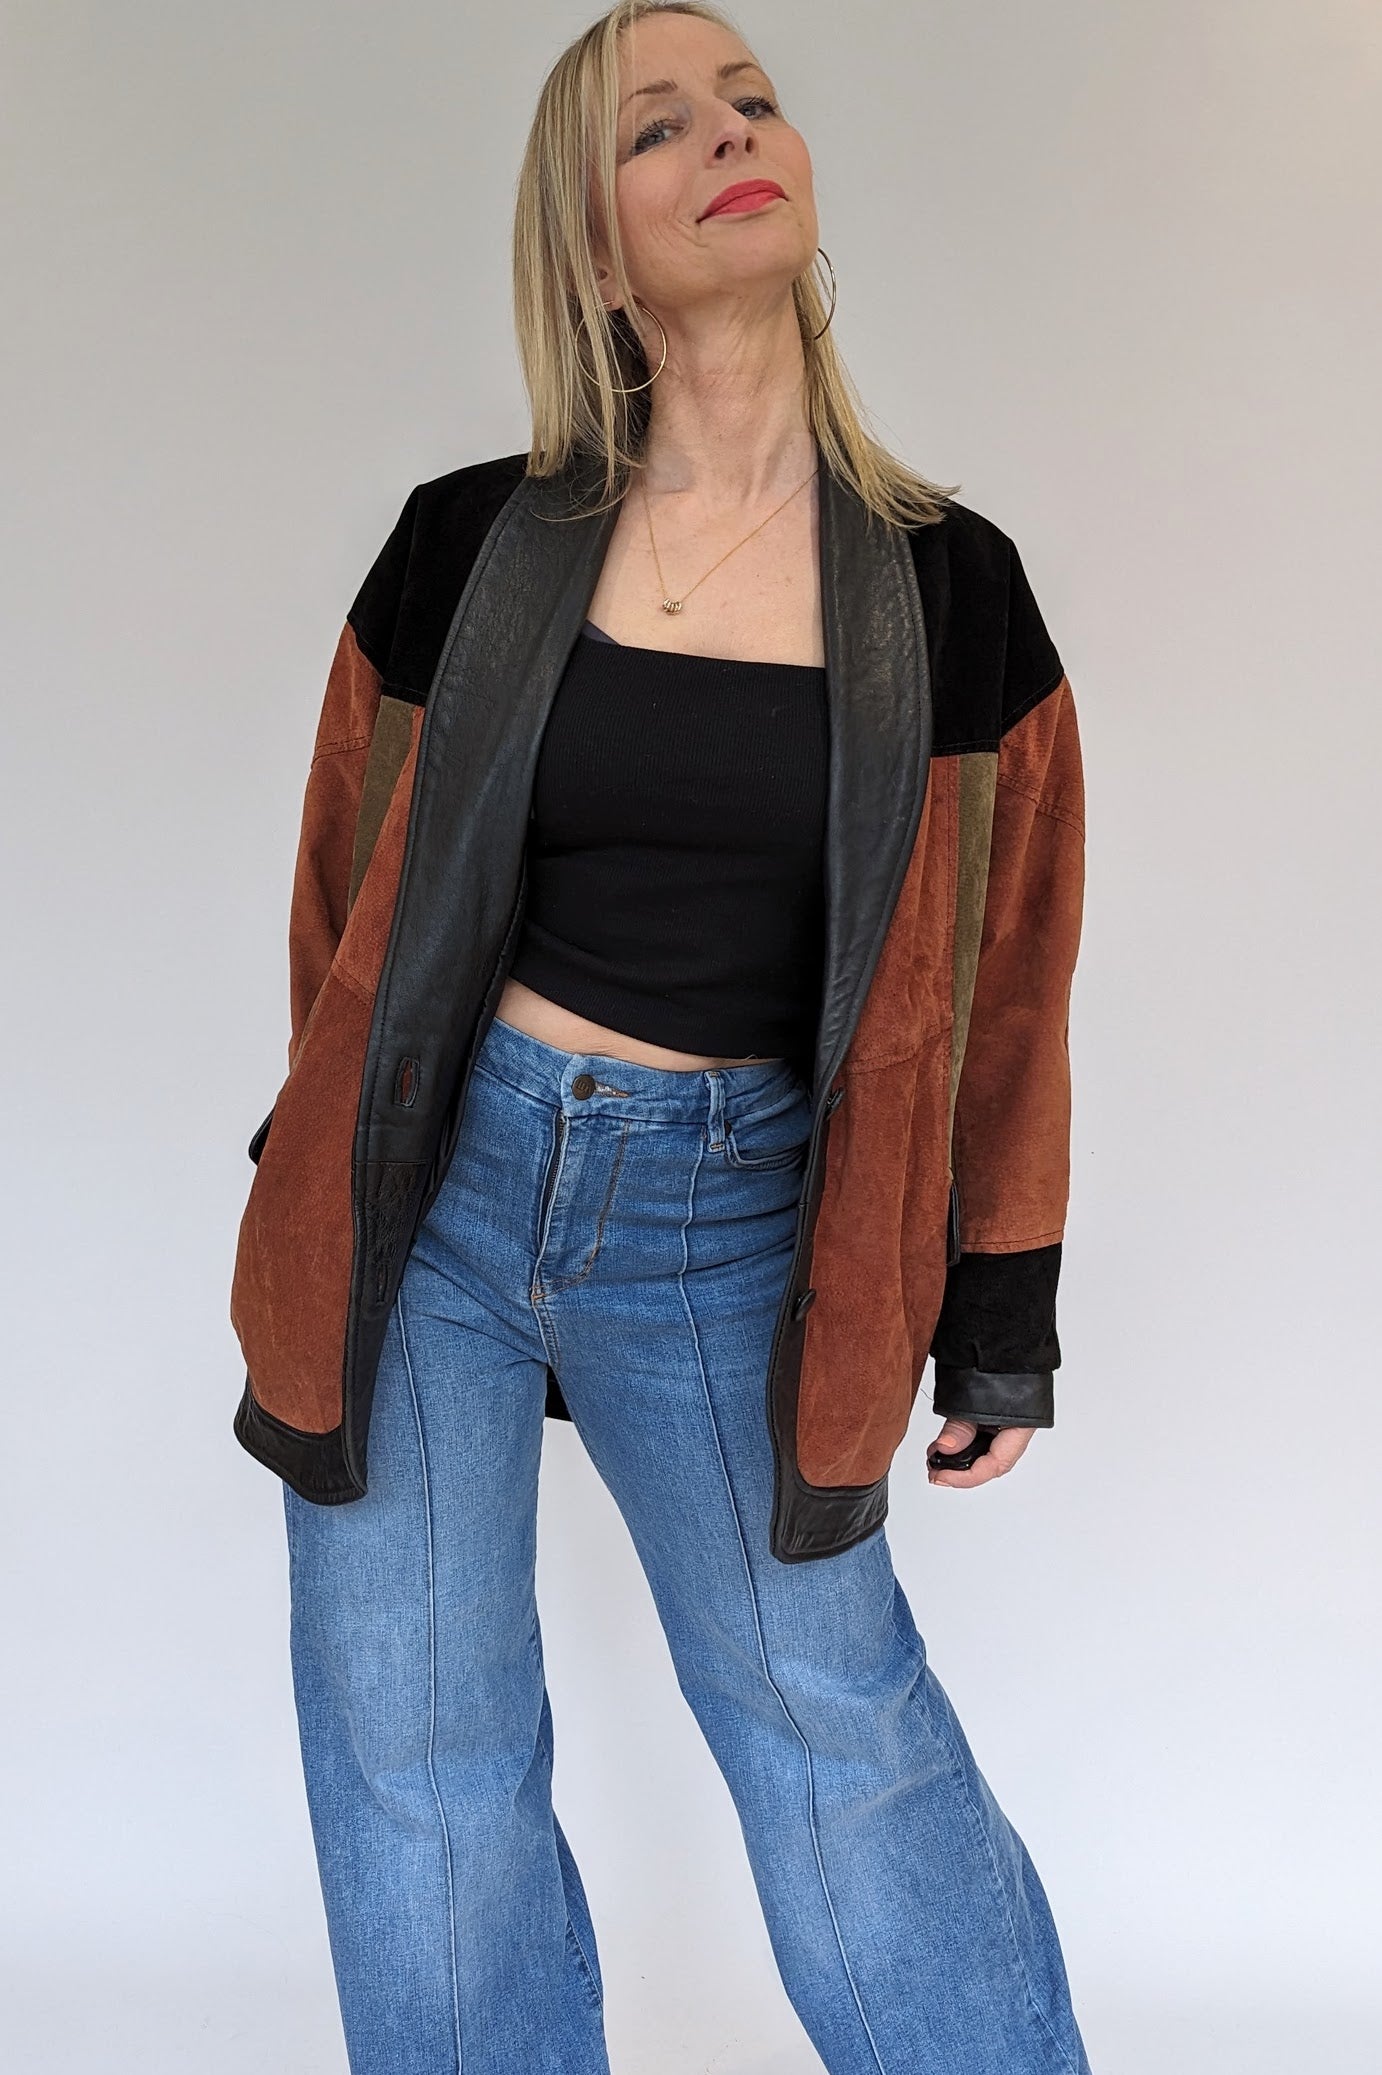 Oversized Suede Patchwork Ladies Jacket in Khaki, Black and Russet with leather trim